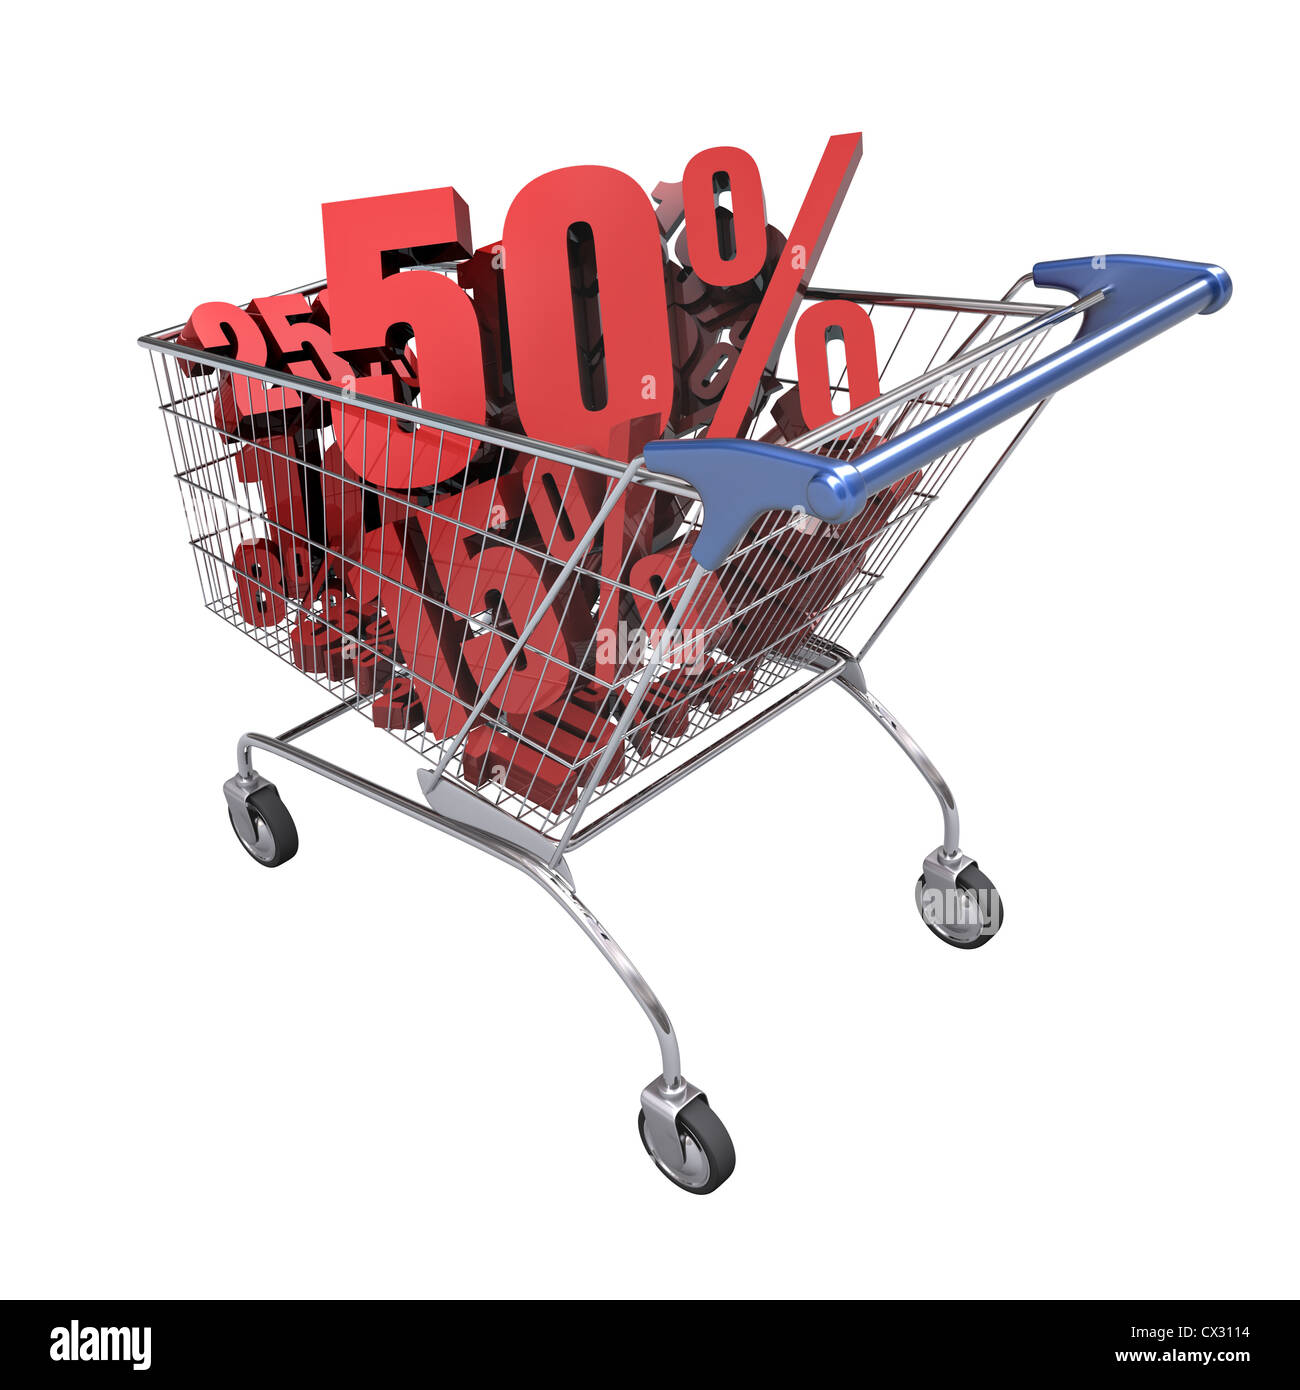 Shopping cart full of discounts, numbers and percentage. Stock Photo